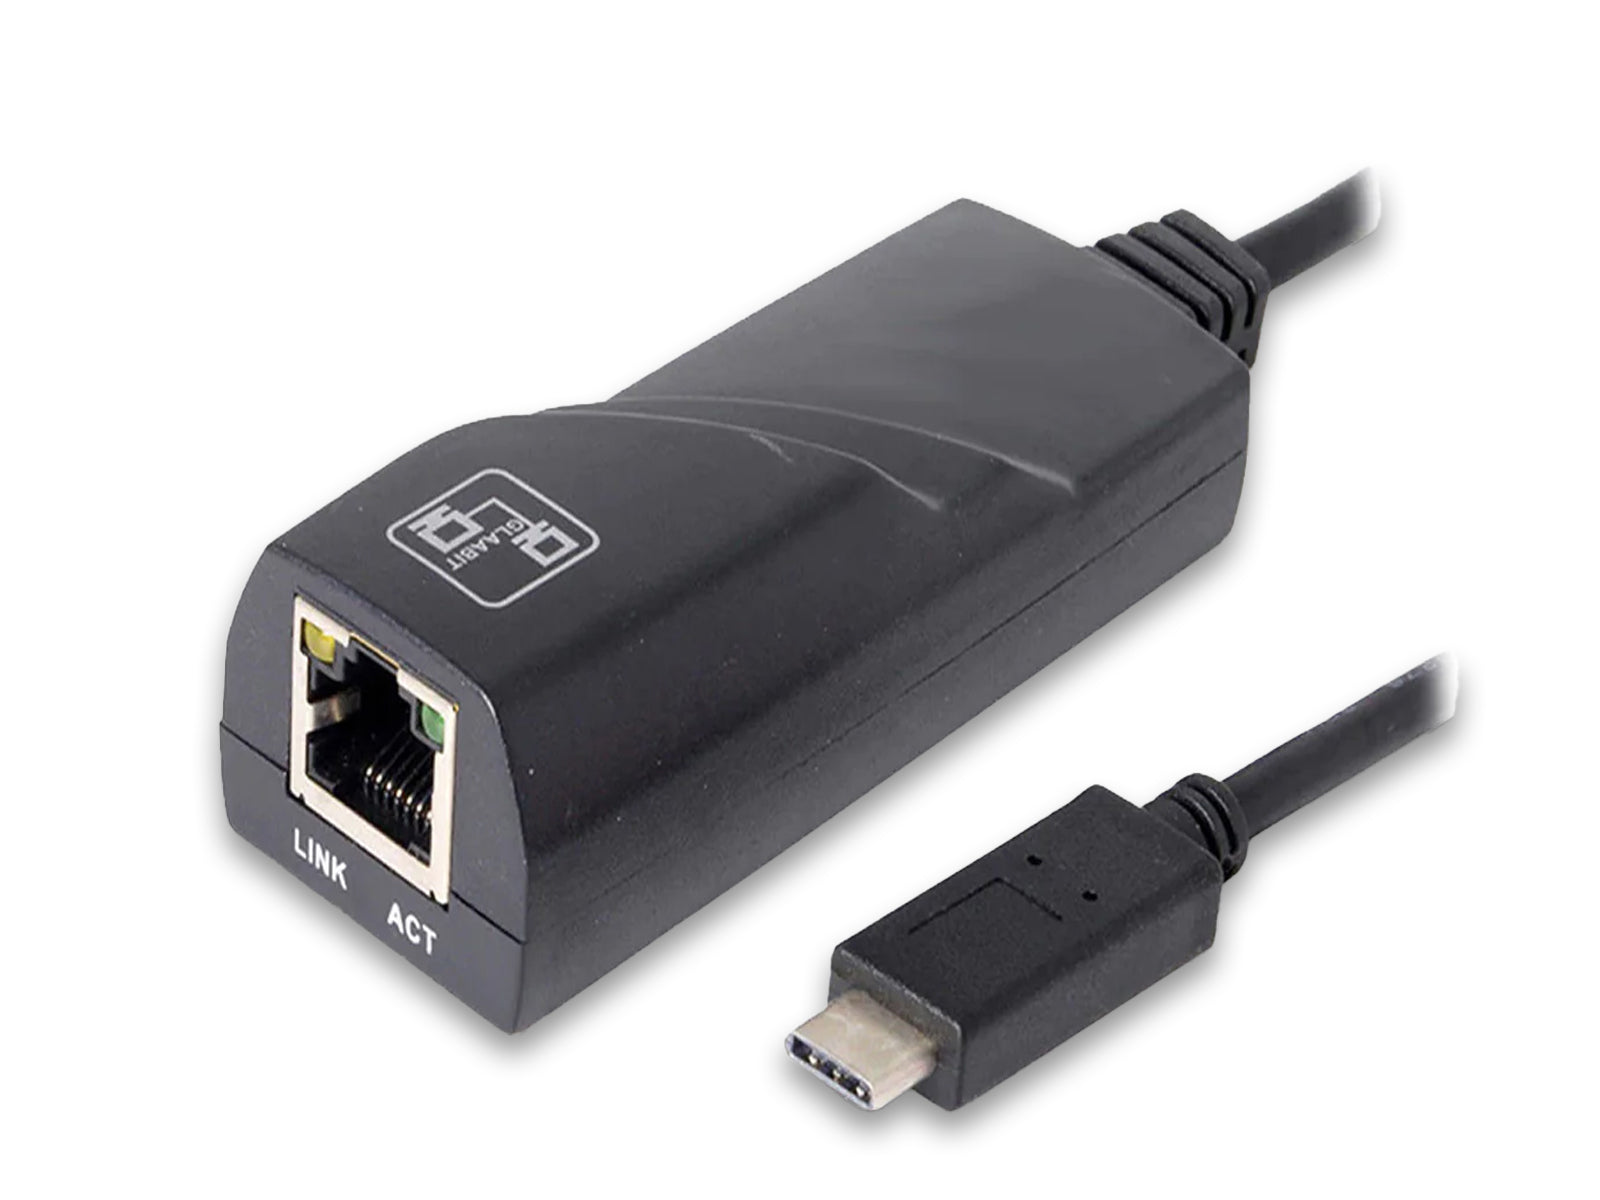 Image shows the RJ45 10/100/1000 Gigabit Ethernet Adapter to USB 3.1 Type-C Plug ideal for use with Macbooks, PCs & laptops